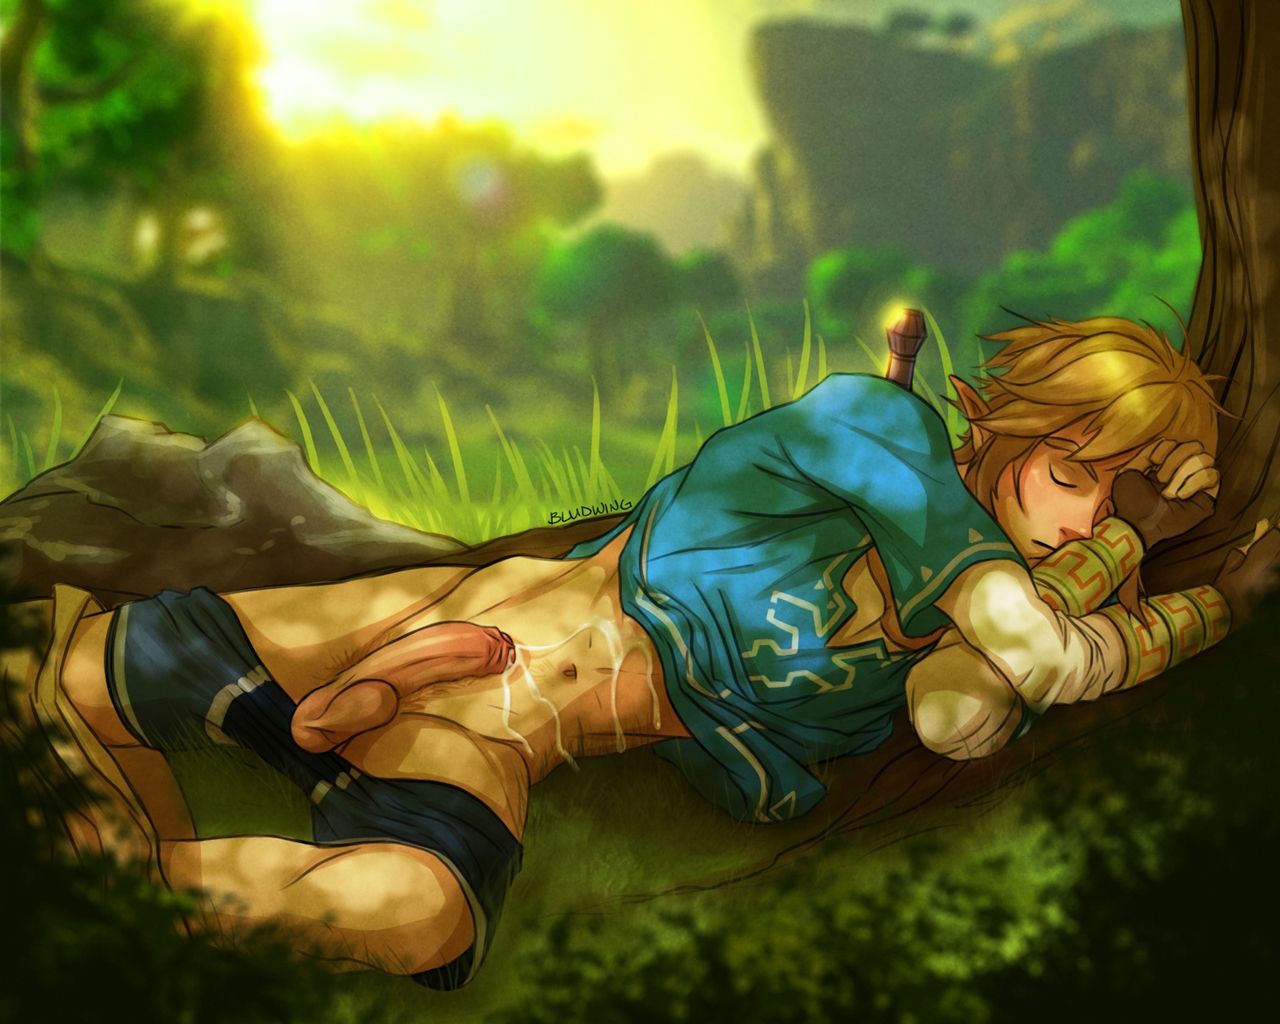 on The Legend of Zelda - Breath of the Wild. on. by. adminupdated. 